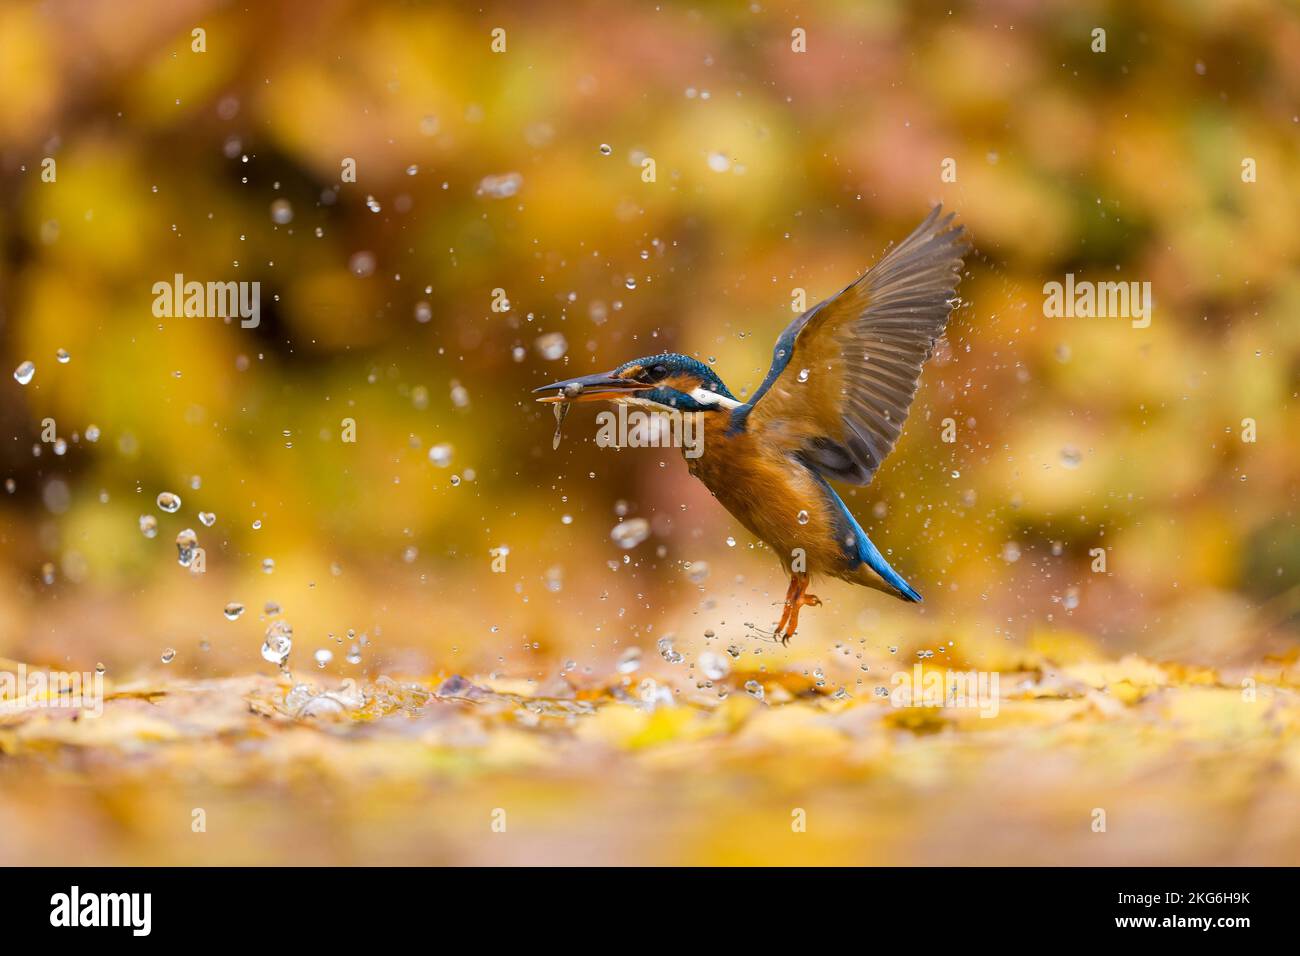 Common kingfisher Alcedo atthis, adult female emerging from leaf covered pond with Three-spined stickleback Gasterosteus aculeatus, prey in beak Stock Photo